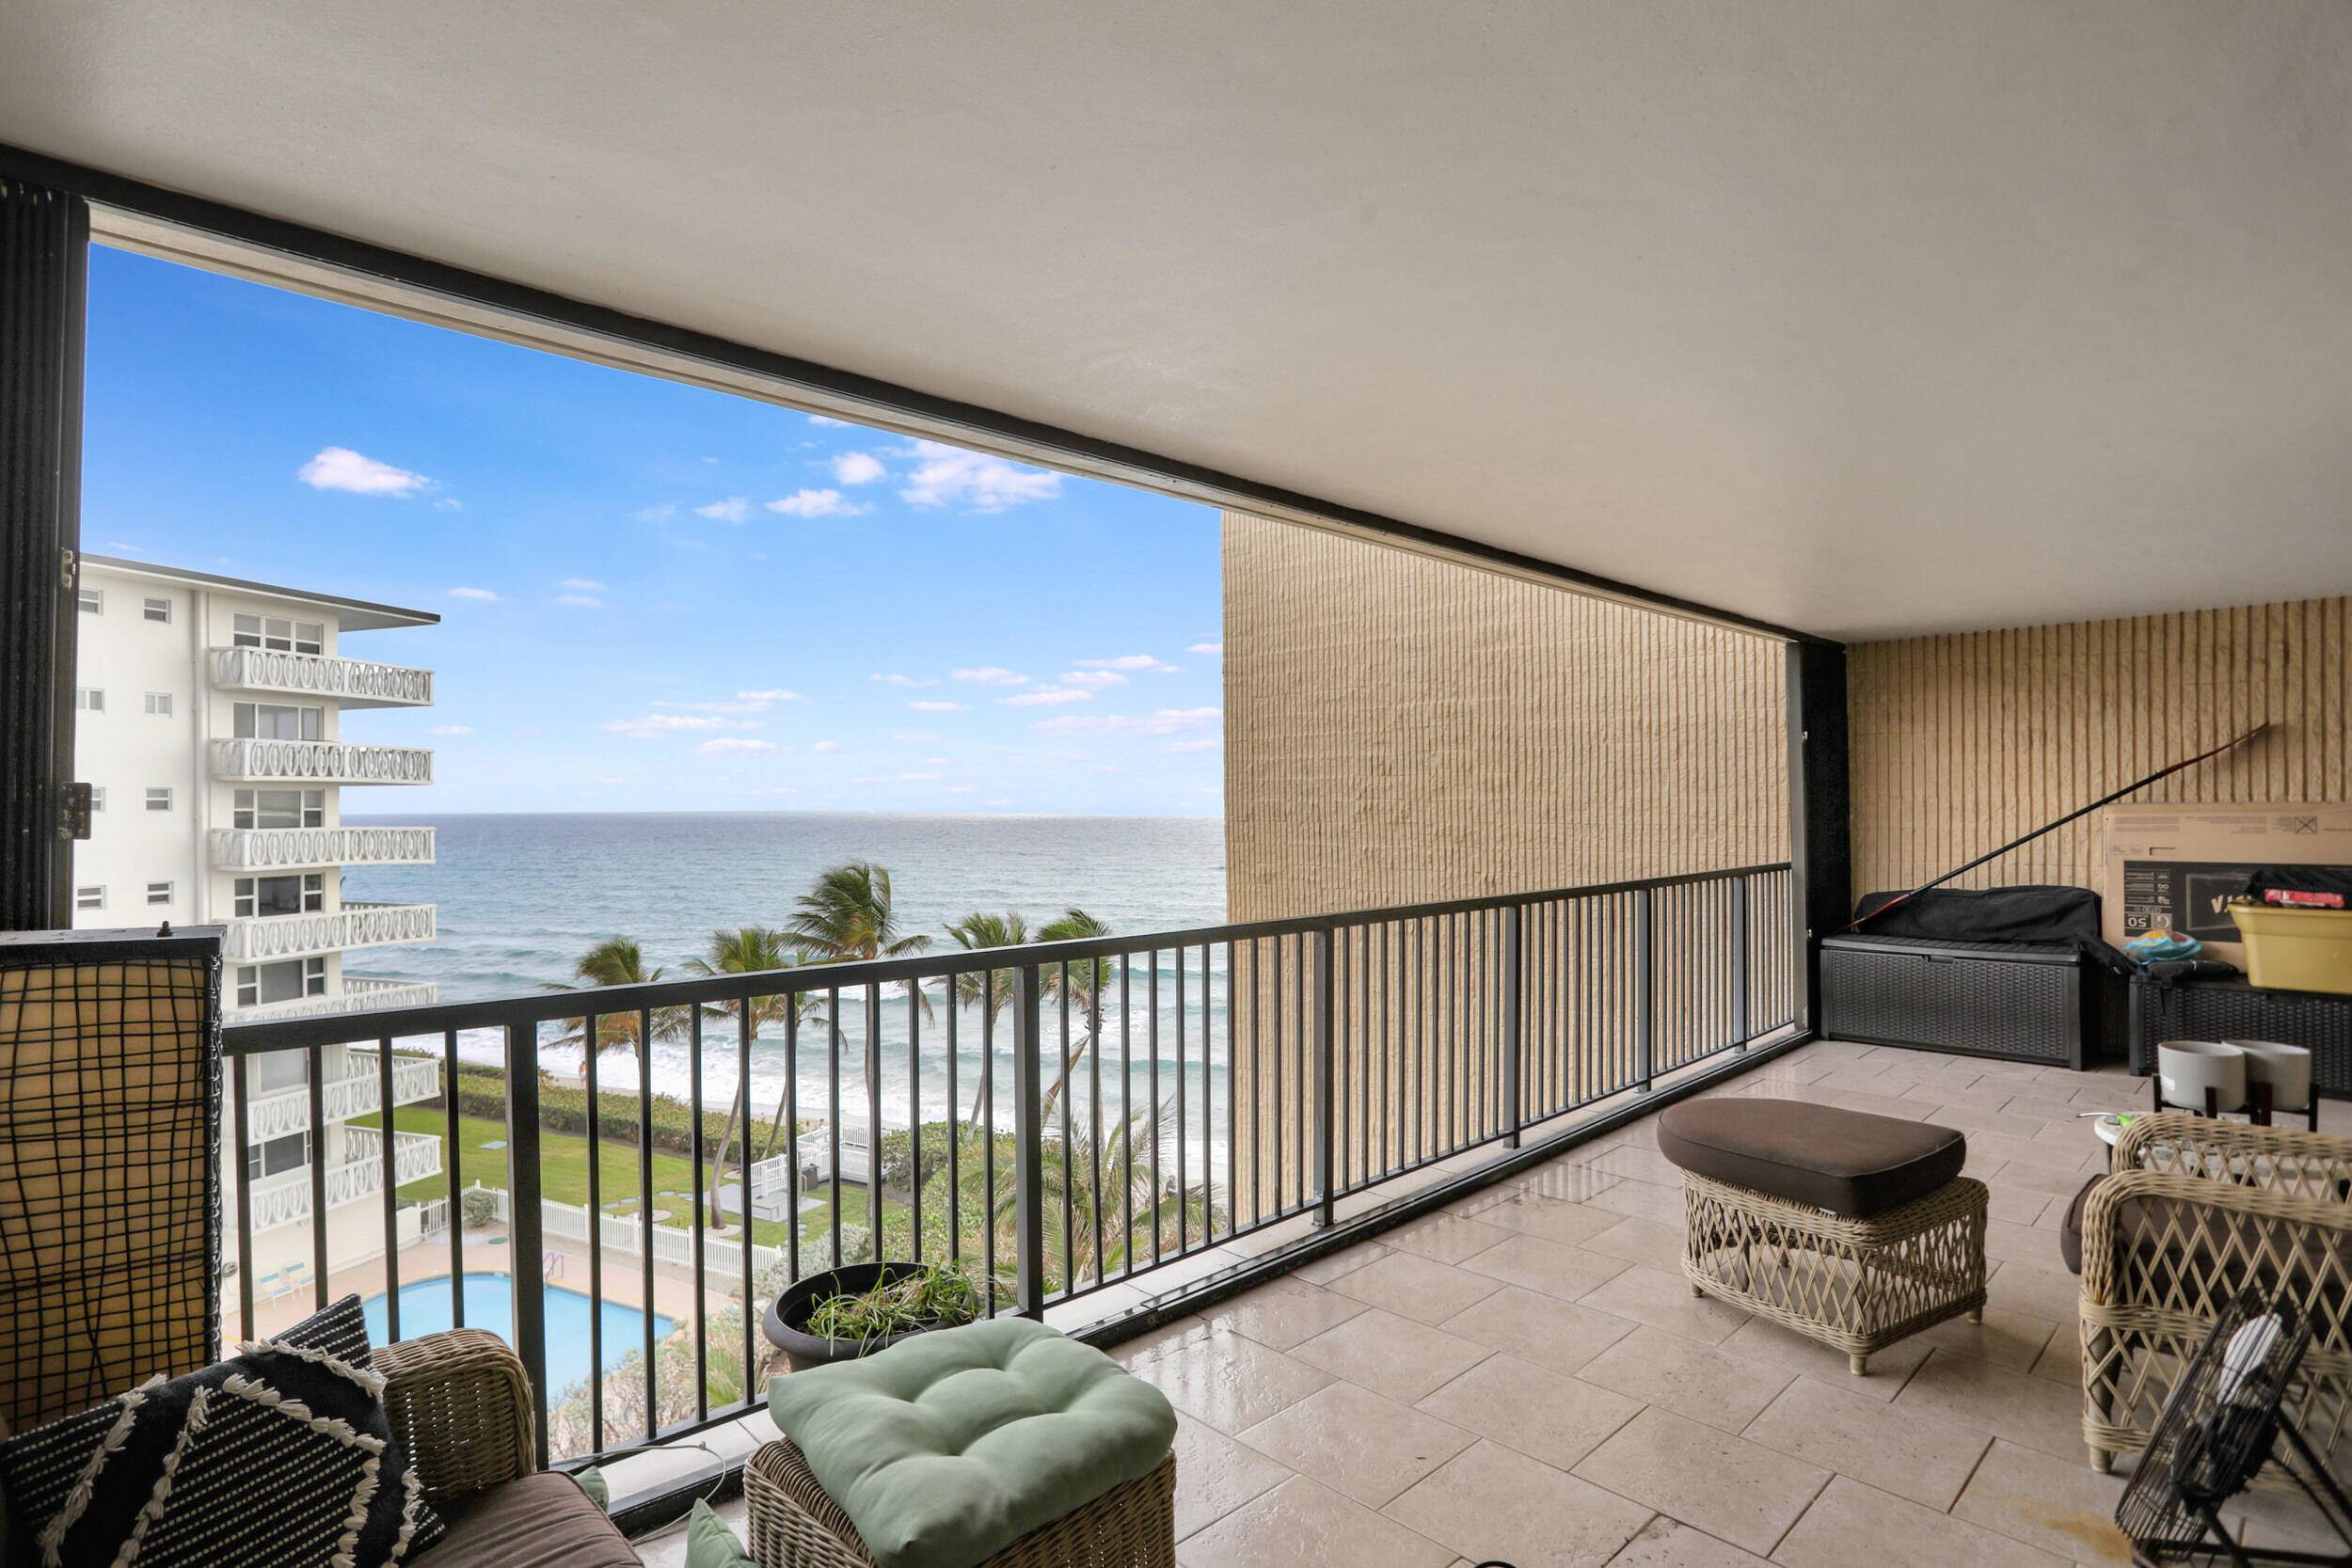 Experience the epitome of luxury Florida living in this remarkable beach condo, boasting a breathtaking, unobstructed ocean view from an expansive balcony.